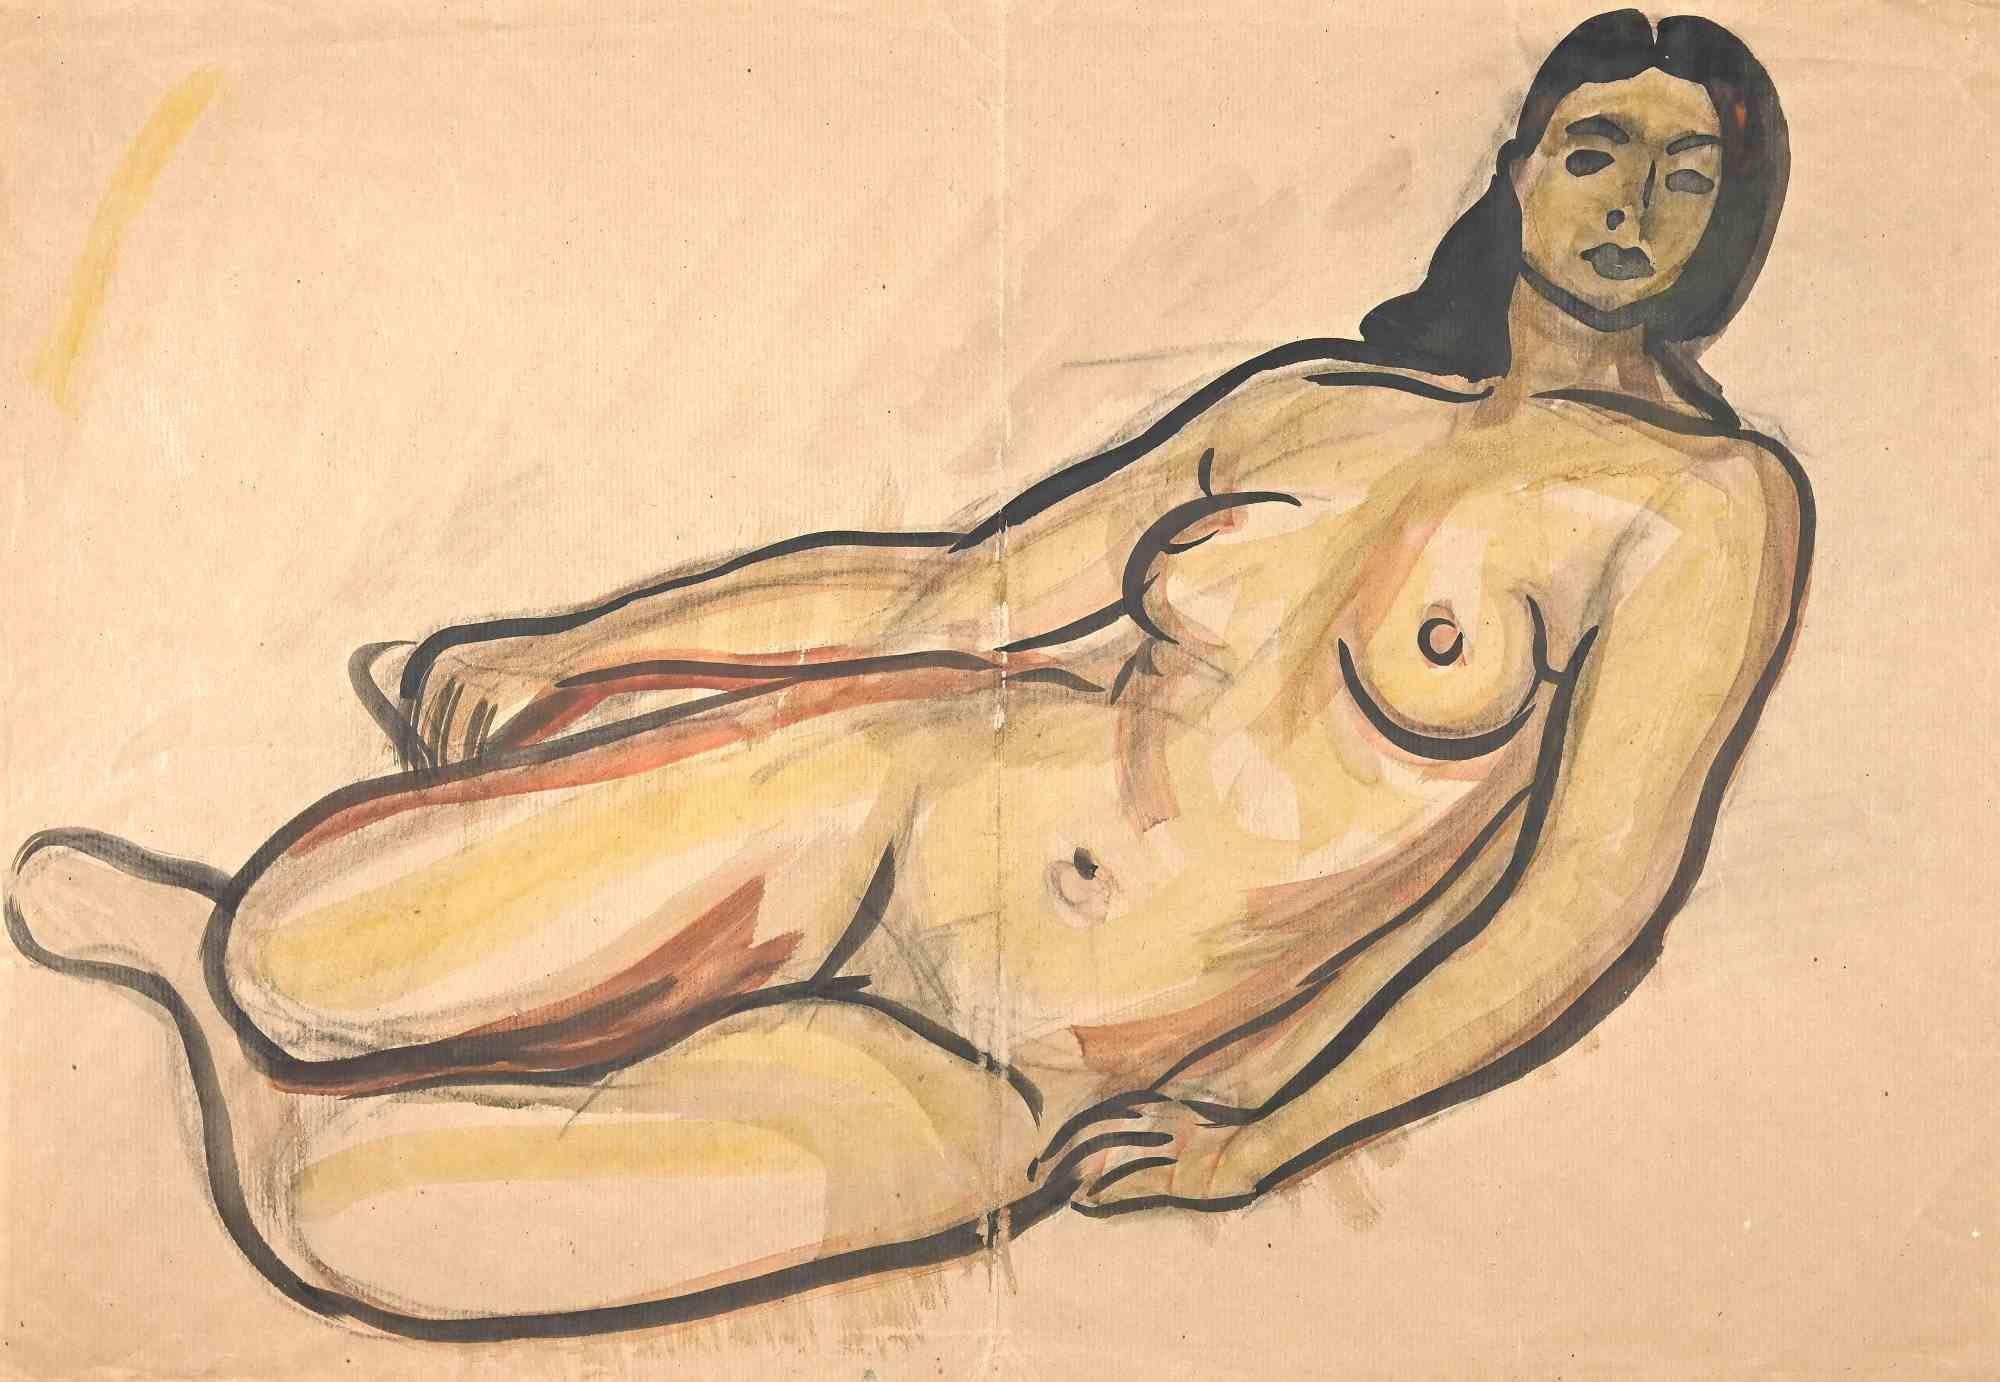 Reclined Nude is a drawing in watercolor realized in the Mid-20th Century by Jean Delpech (1916-1988). 

Good conditions except for folding and cuts.

The artwork is realized in deft strokes and harmonious and congruent colors through